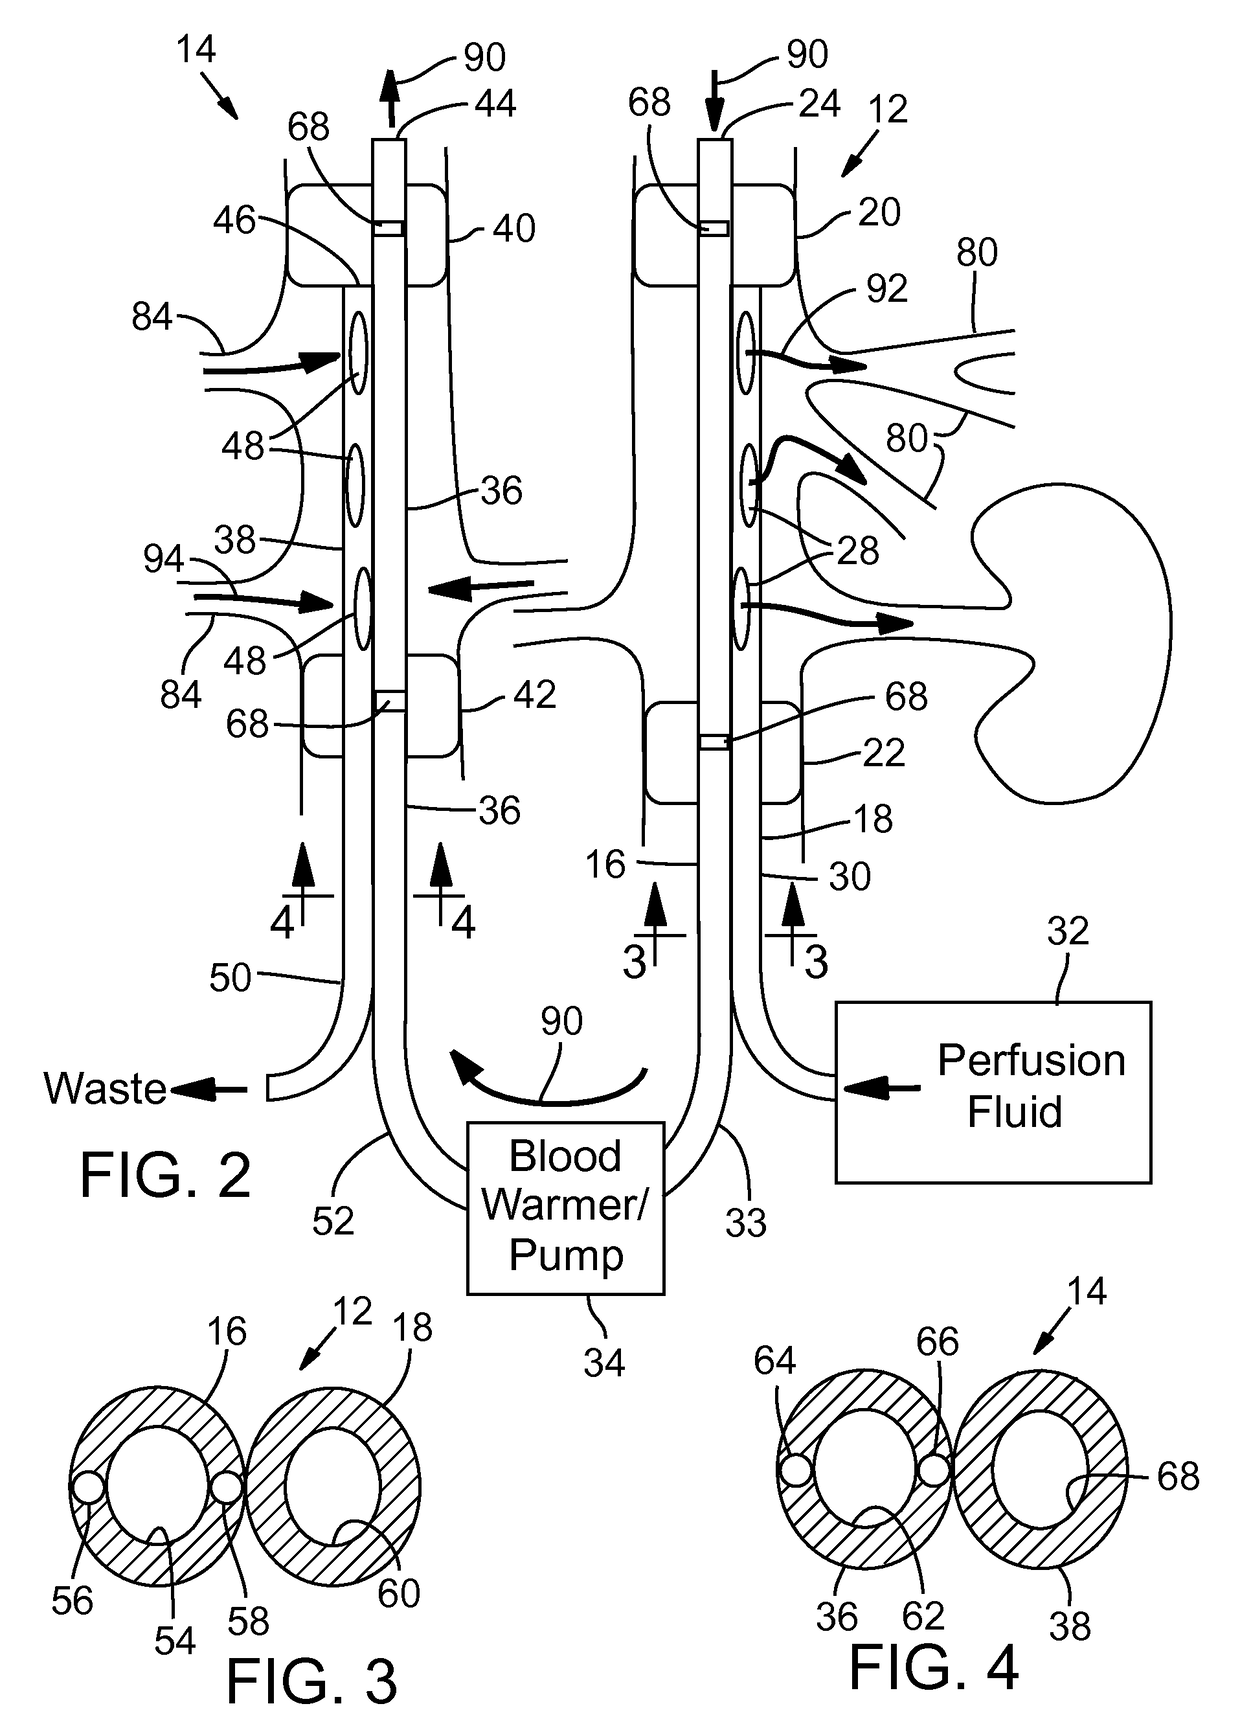 Endovascular apparatus for perfusing organs in a body